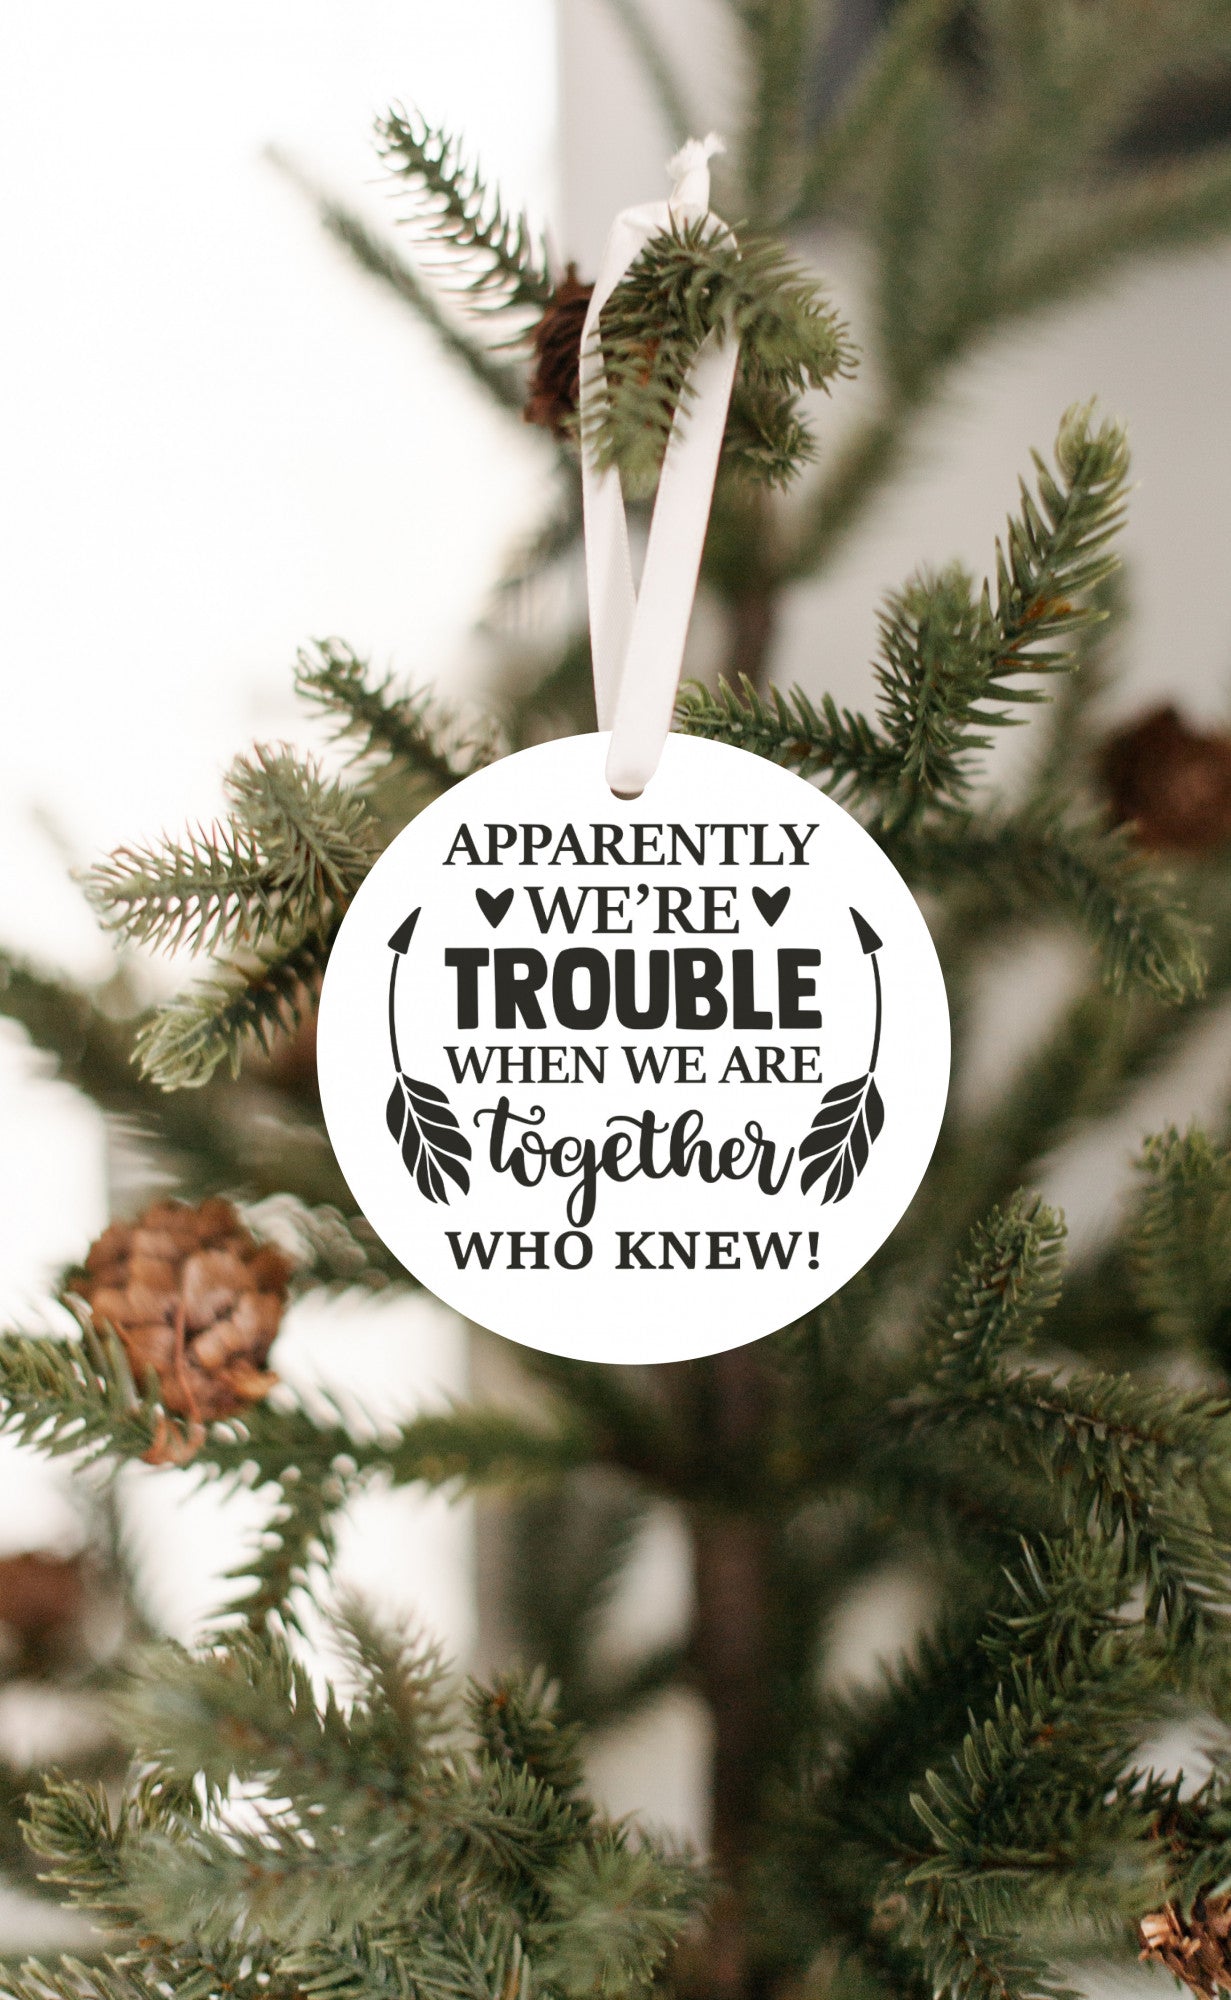 Apparently We're Trouble When We Are Together - Who Knew! Holiday Ornament